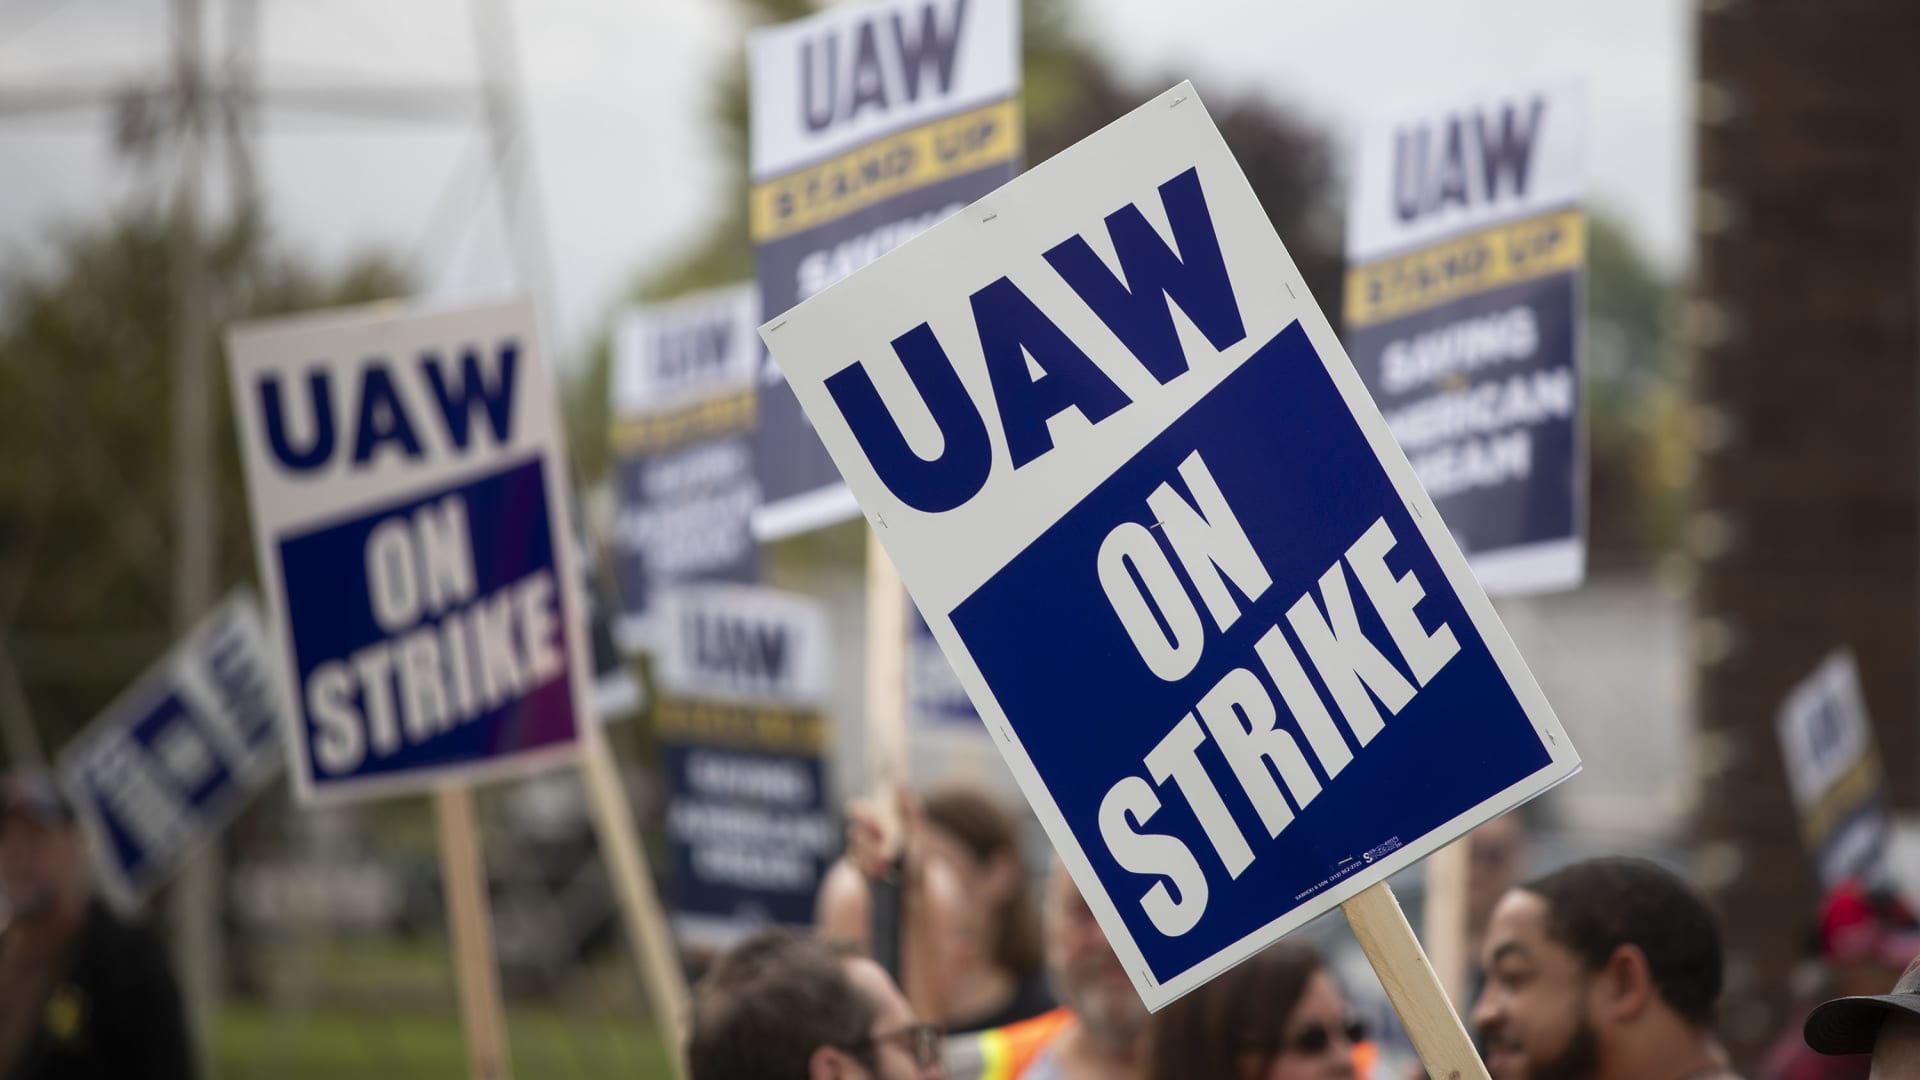 GM union workers ratify UAW deal following contentious vote